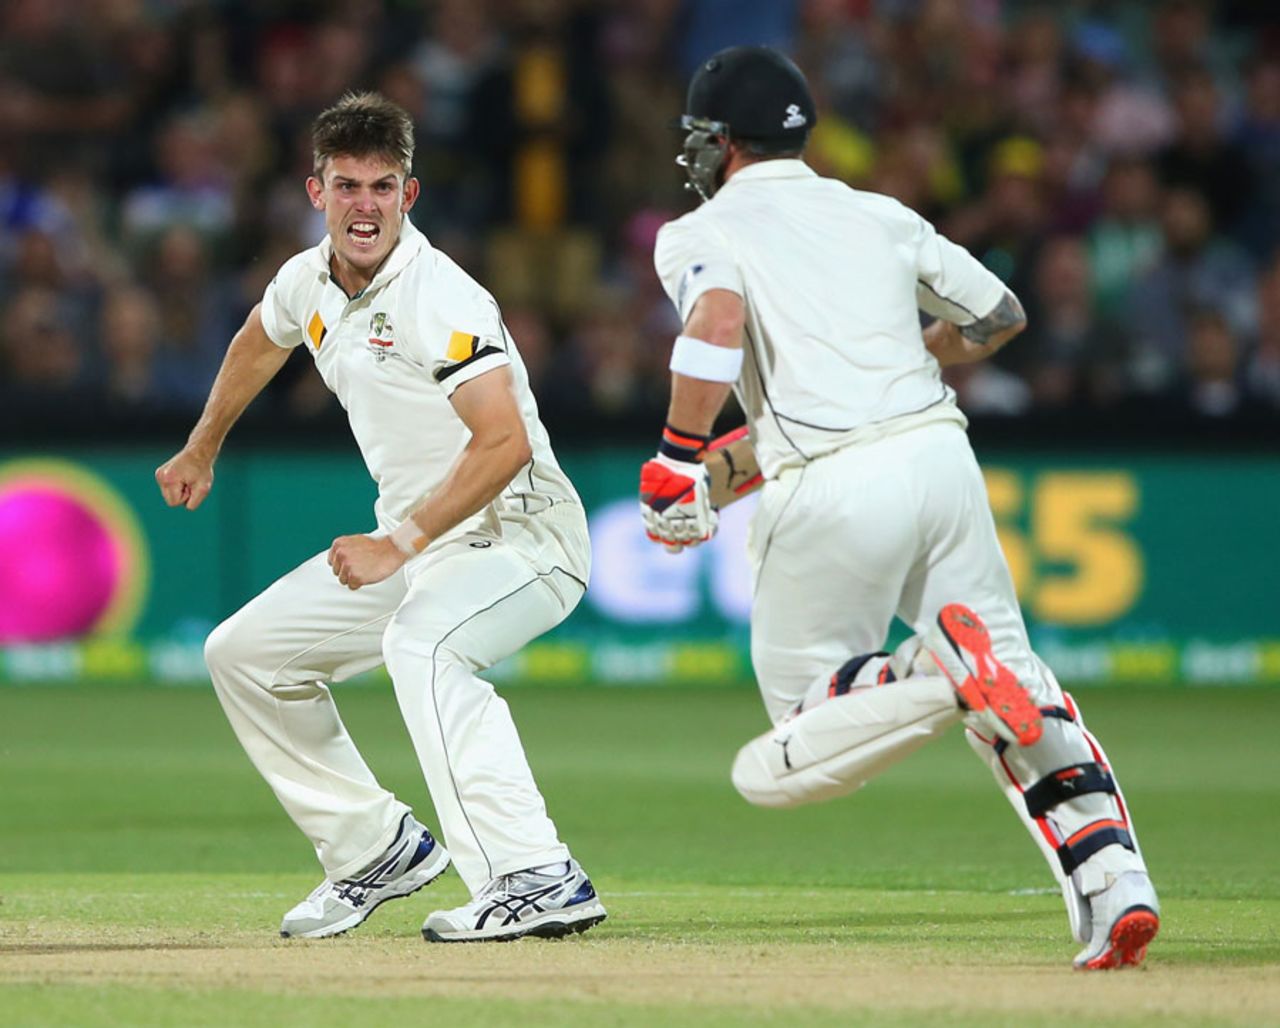 Mitchell Marsh is more than pleased after trapping Brendon McCullum in front, Australia v New Zealand, 3rd Test, Adelaide, 2nd day, November 28, 2015